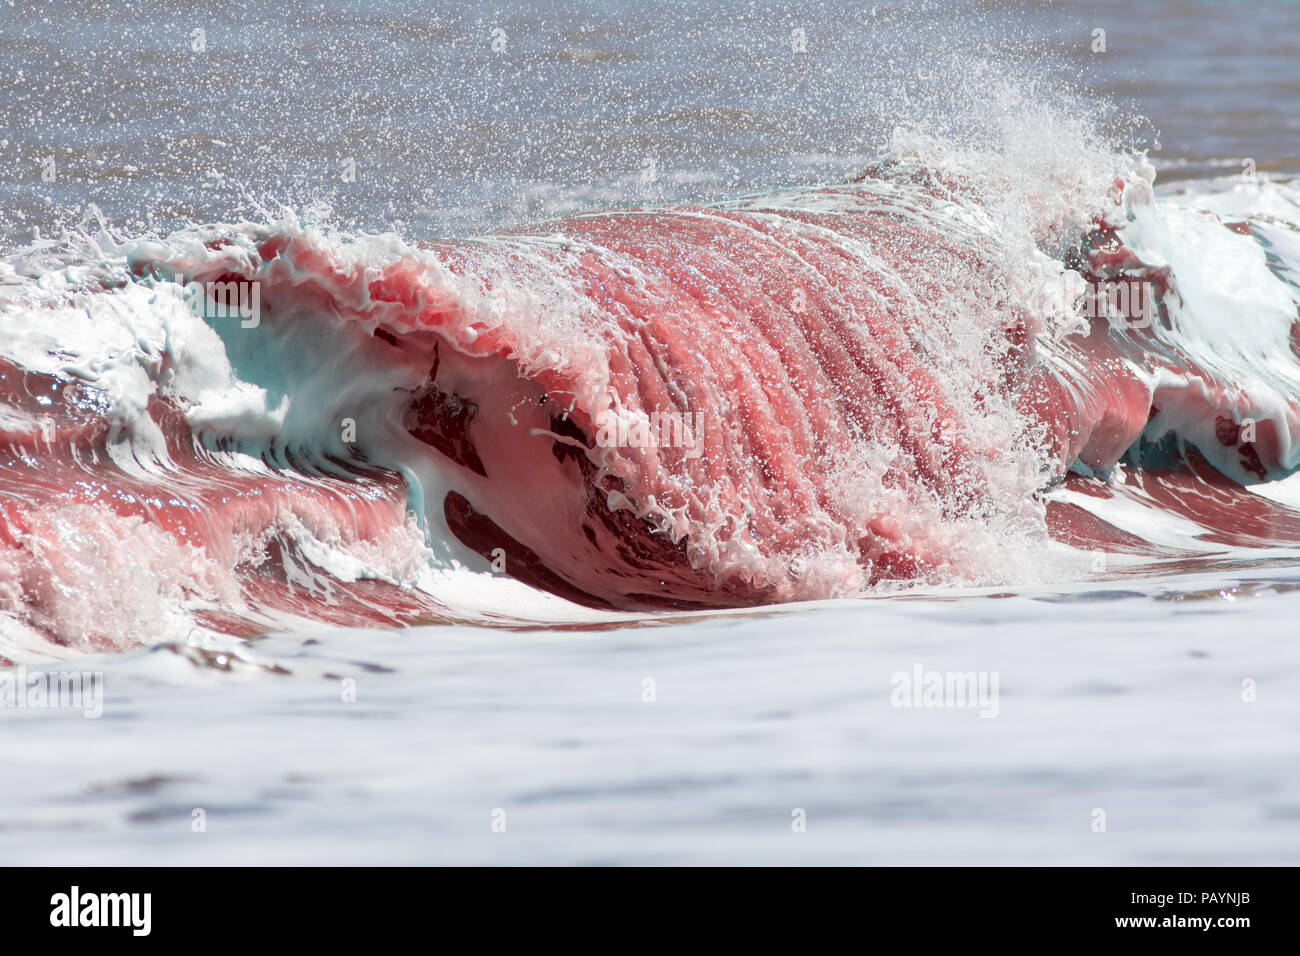 Blood red sea wave. Cause unknown. Possibly shark attack or propellor strike or red algae or seaweed in the ocean water. Stock Photo